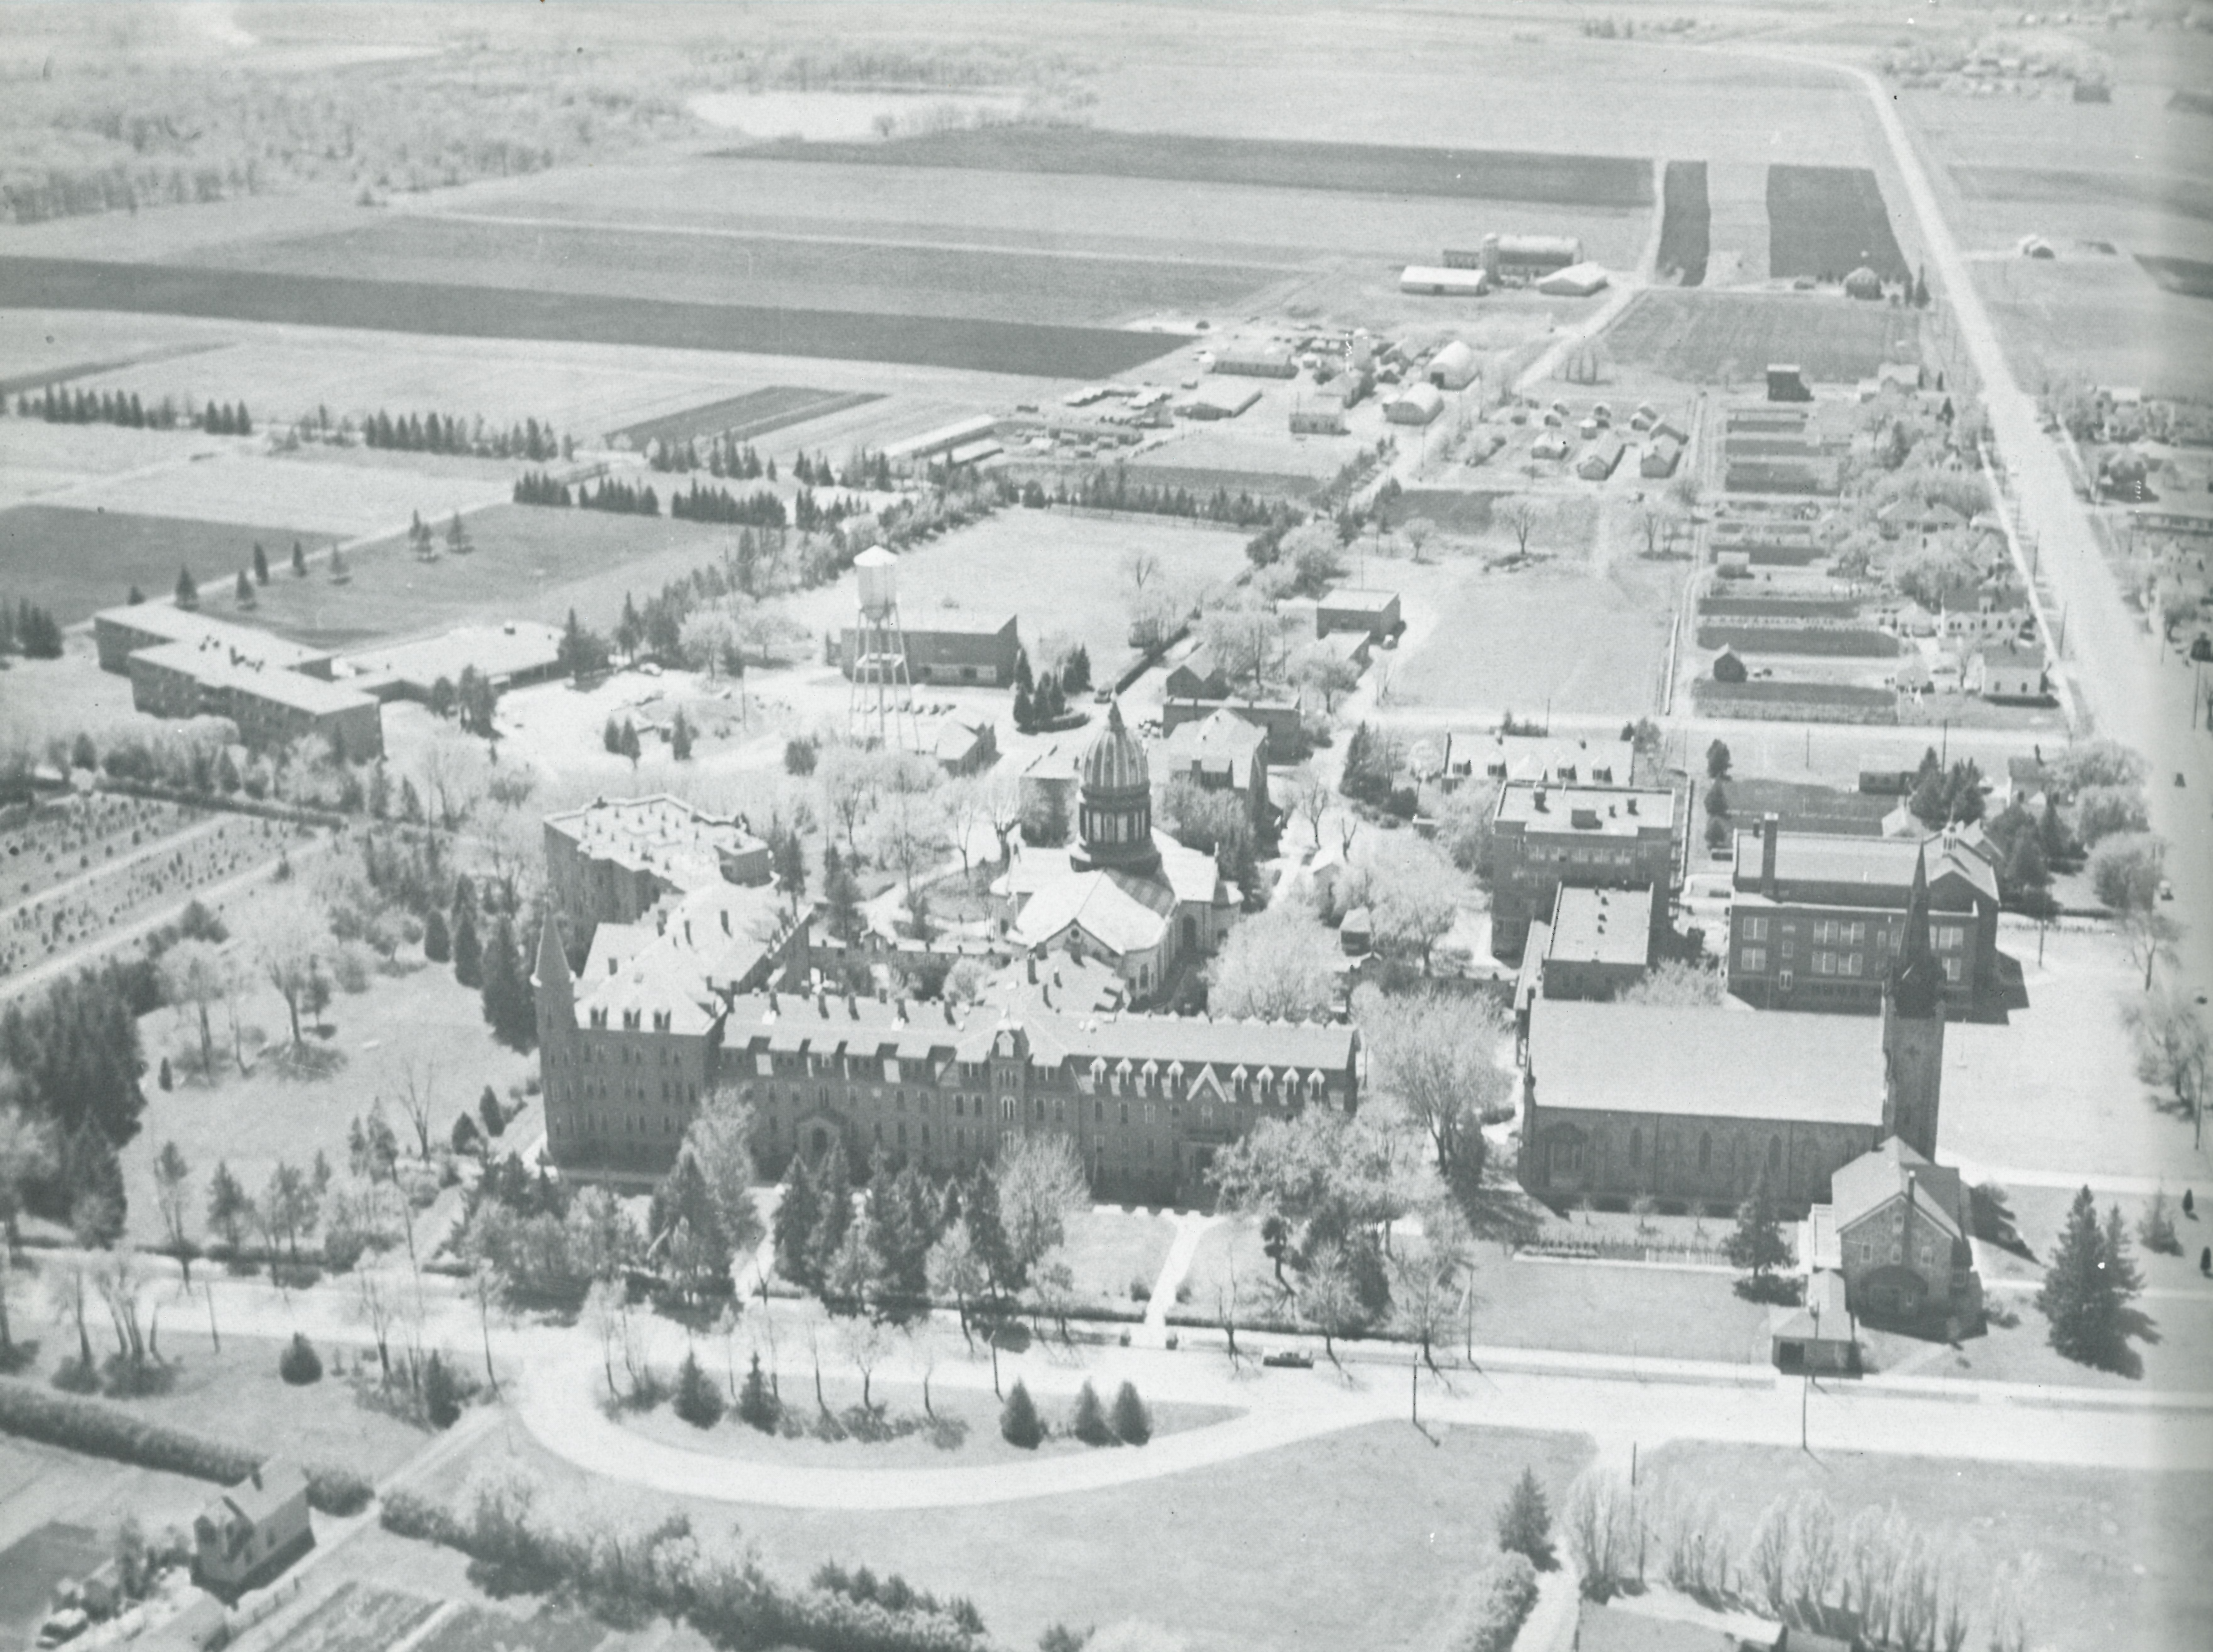 Aerial Photo of Main Building from Harvest (published in 1957)